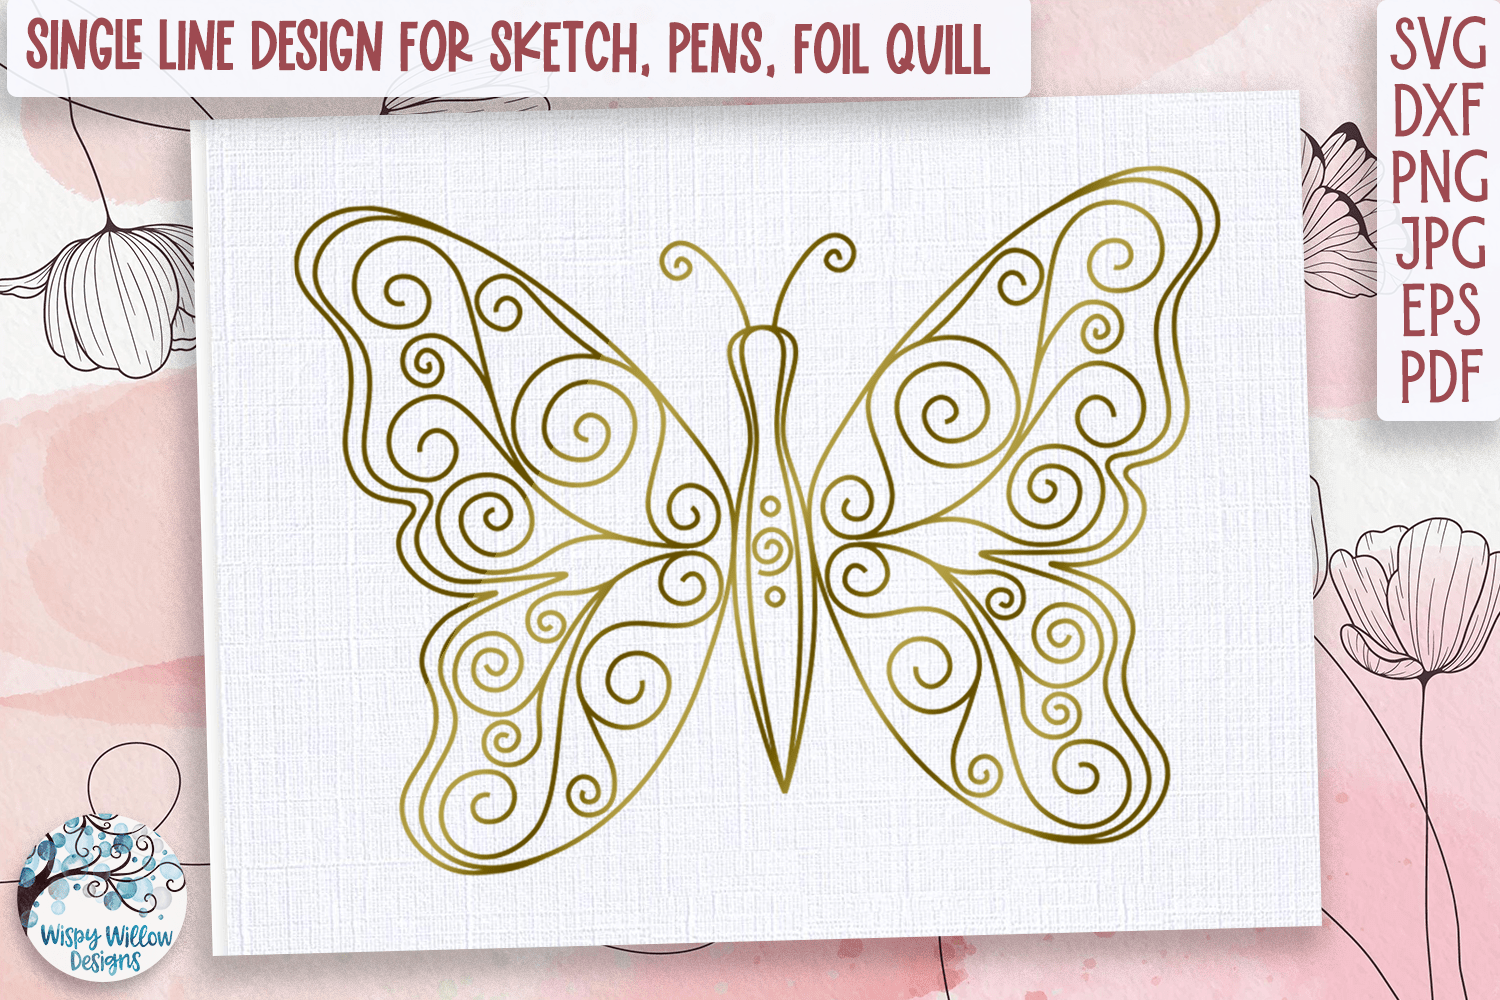 Butterfly SVG for Foil Quill, Sketch, Draw, Pens, Score - Single Line Design Wispy Willow Designs Company